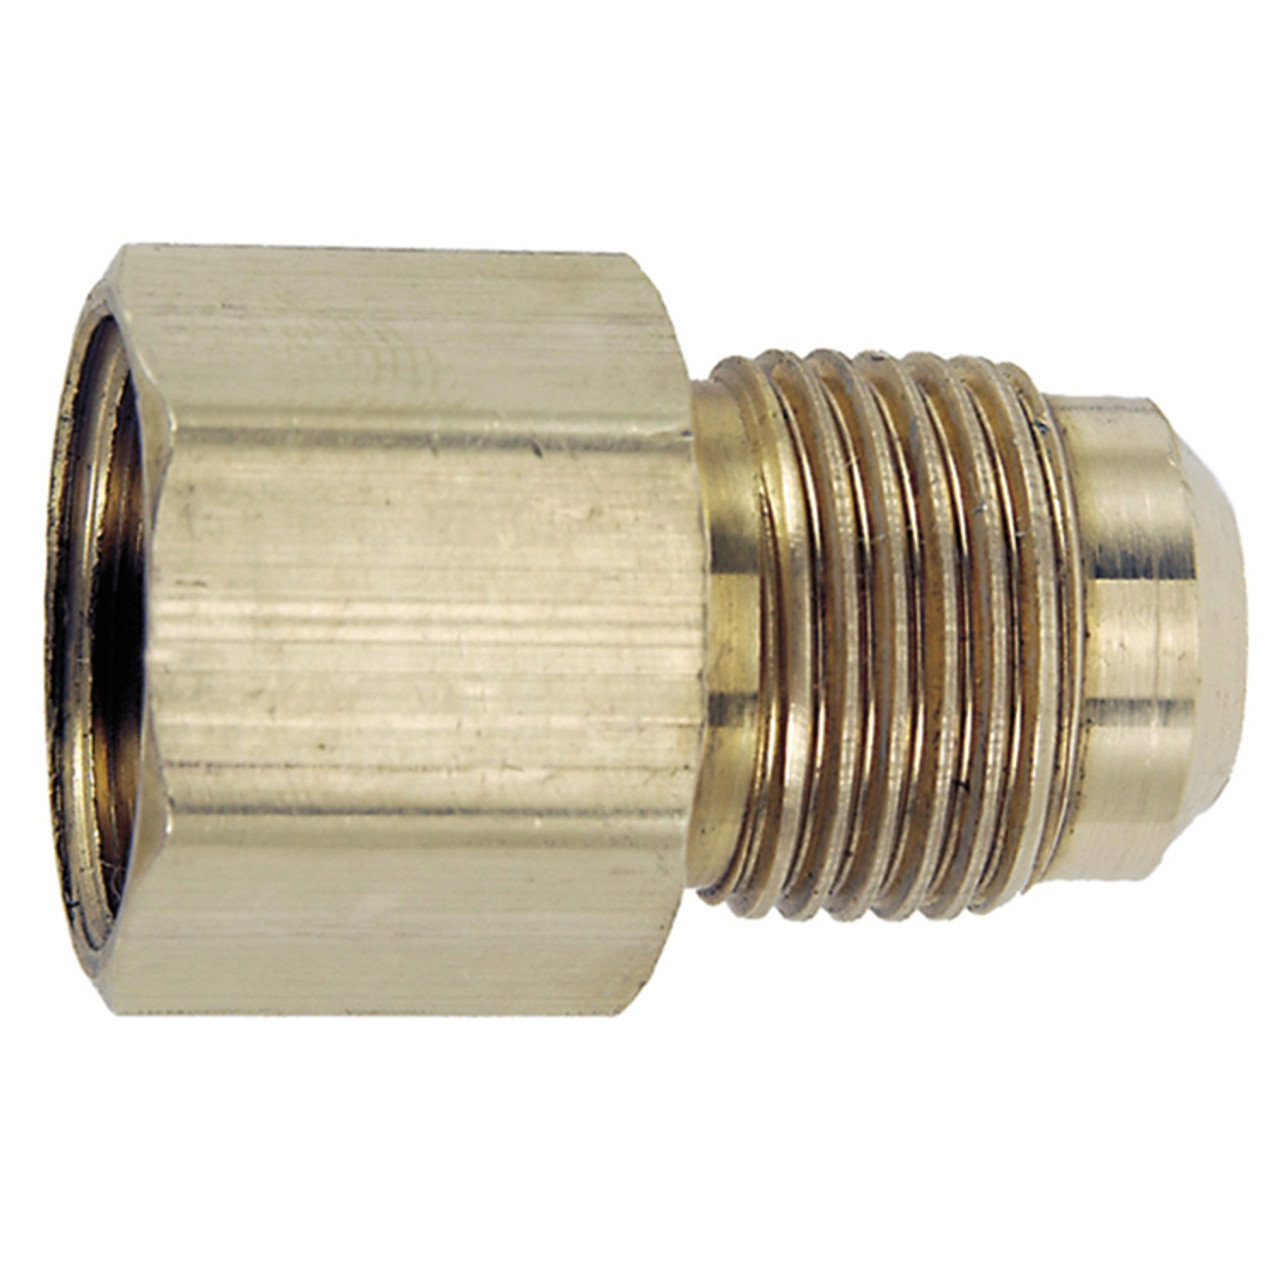 3/8 x 3/8" Brass Female NPT - Male 45° SAE Flare Connector   G1408-06-06